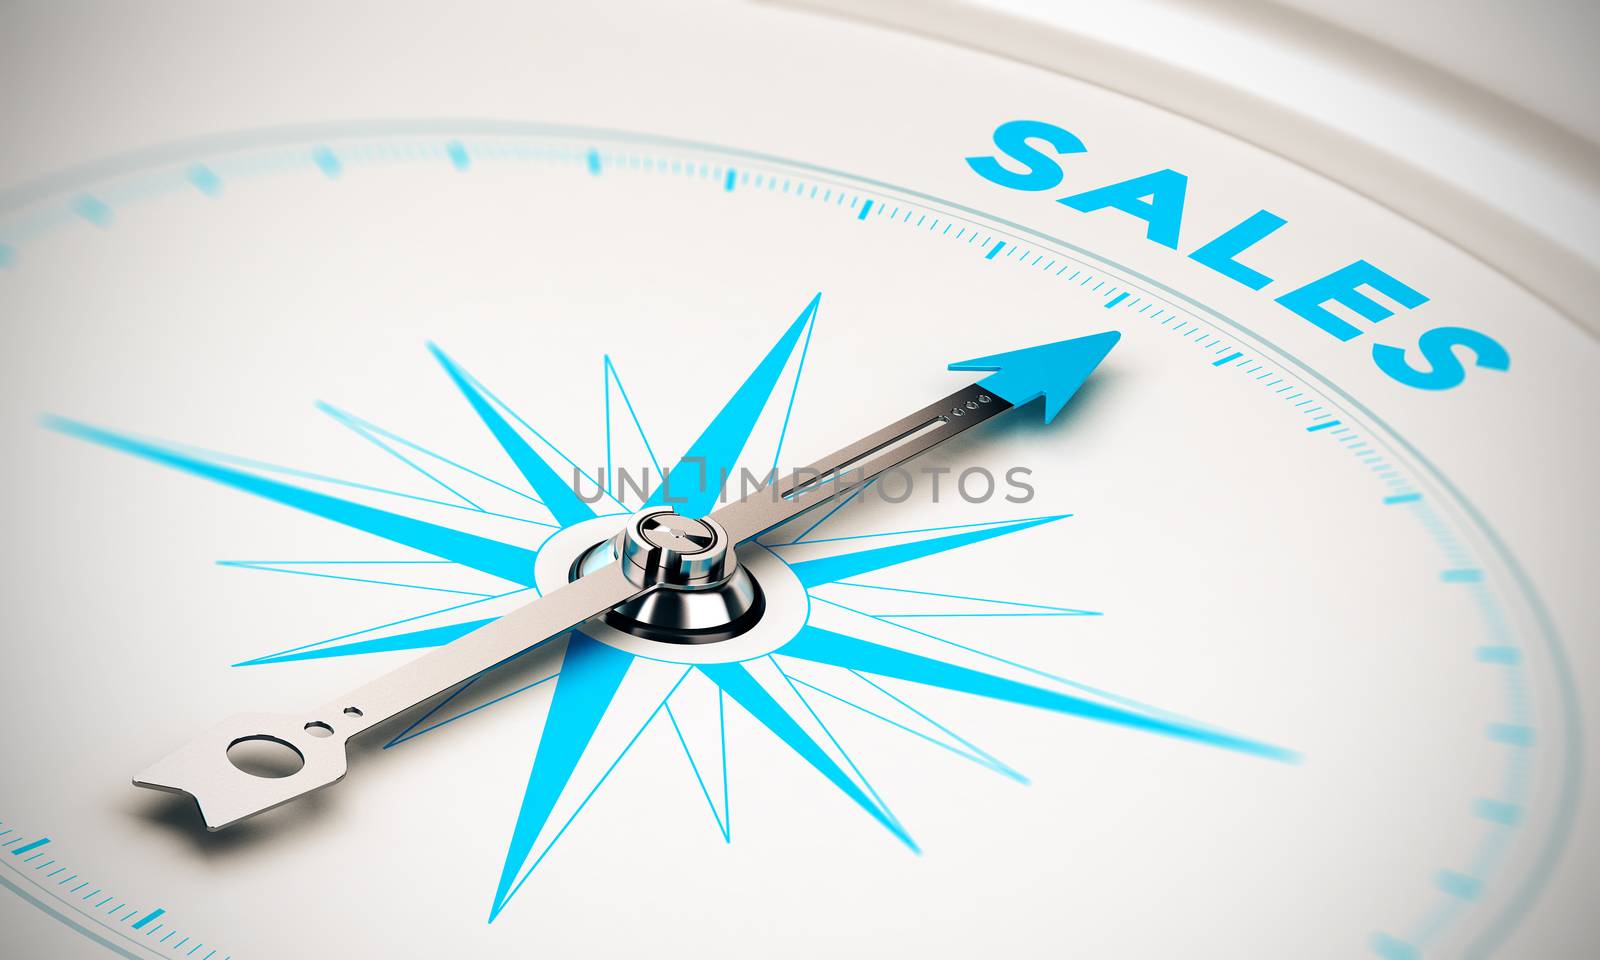 Compass with needle pointing the word sales, white and blue tones. Background image for illustration of sales goals